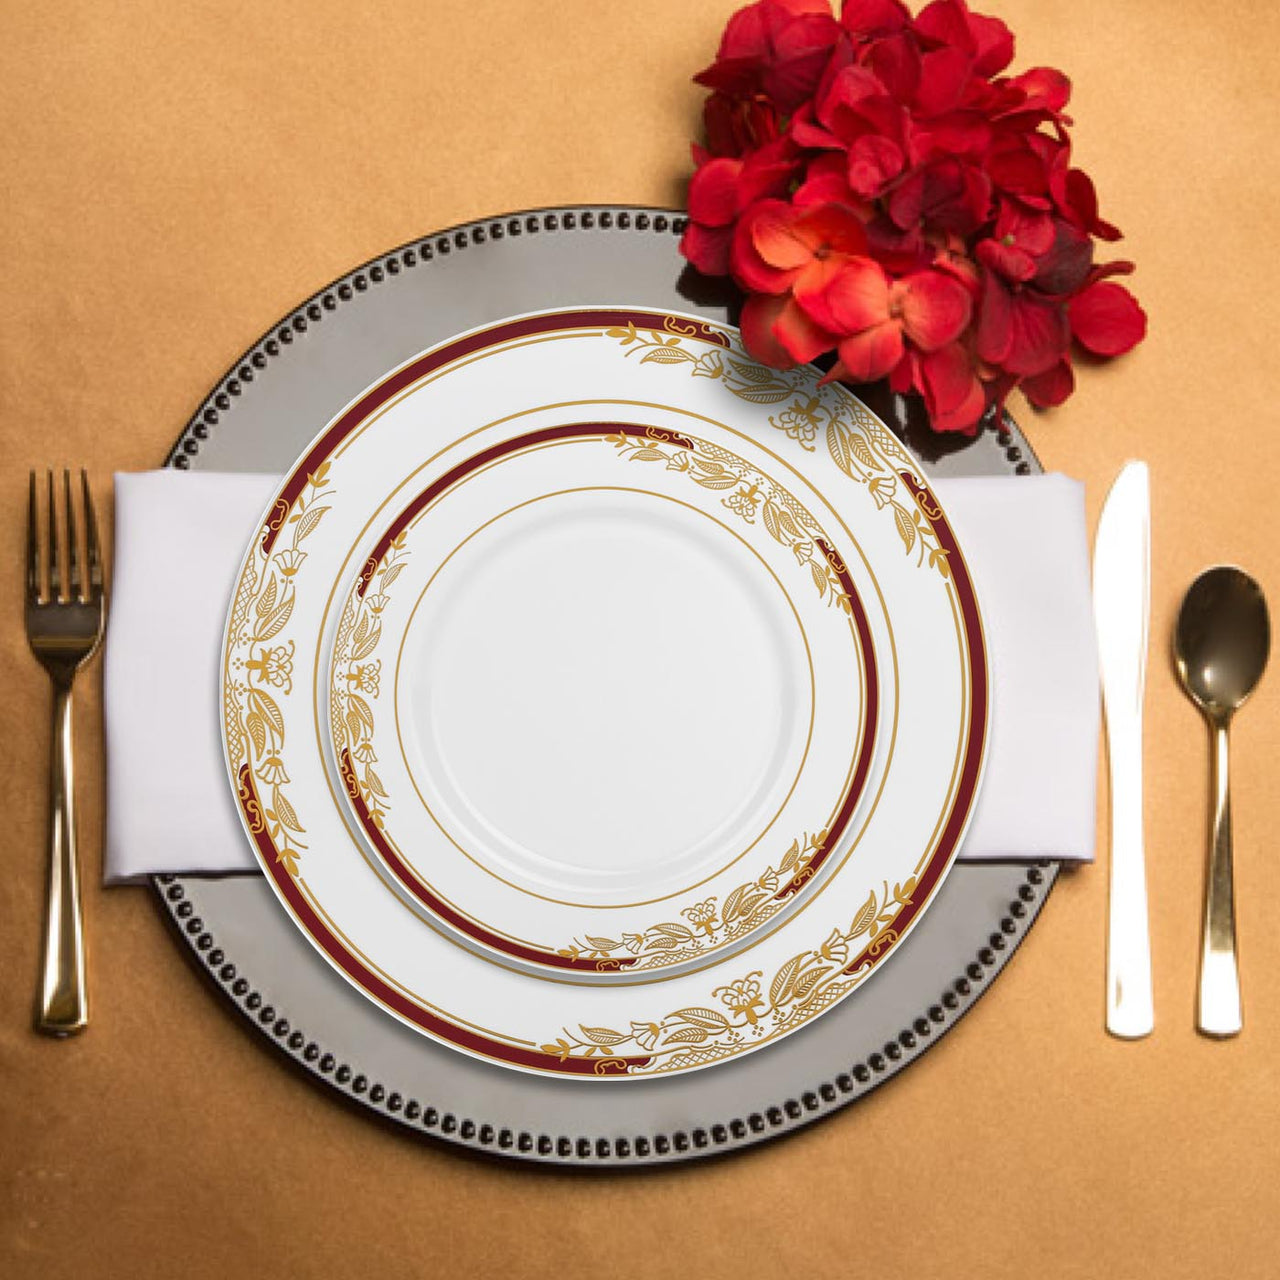 White with Burgundy and Gold Harmony Plates Collection